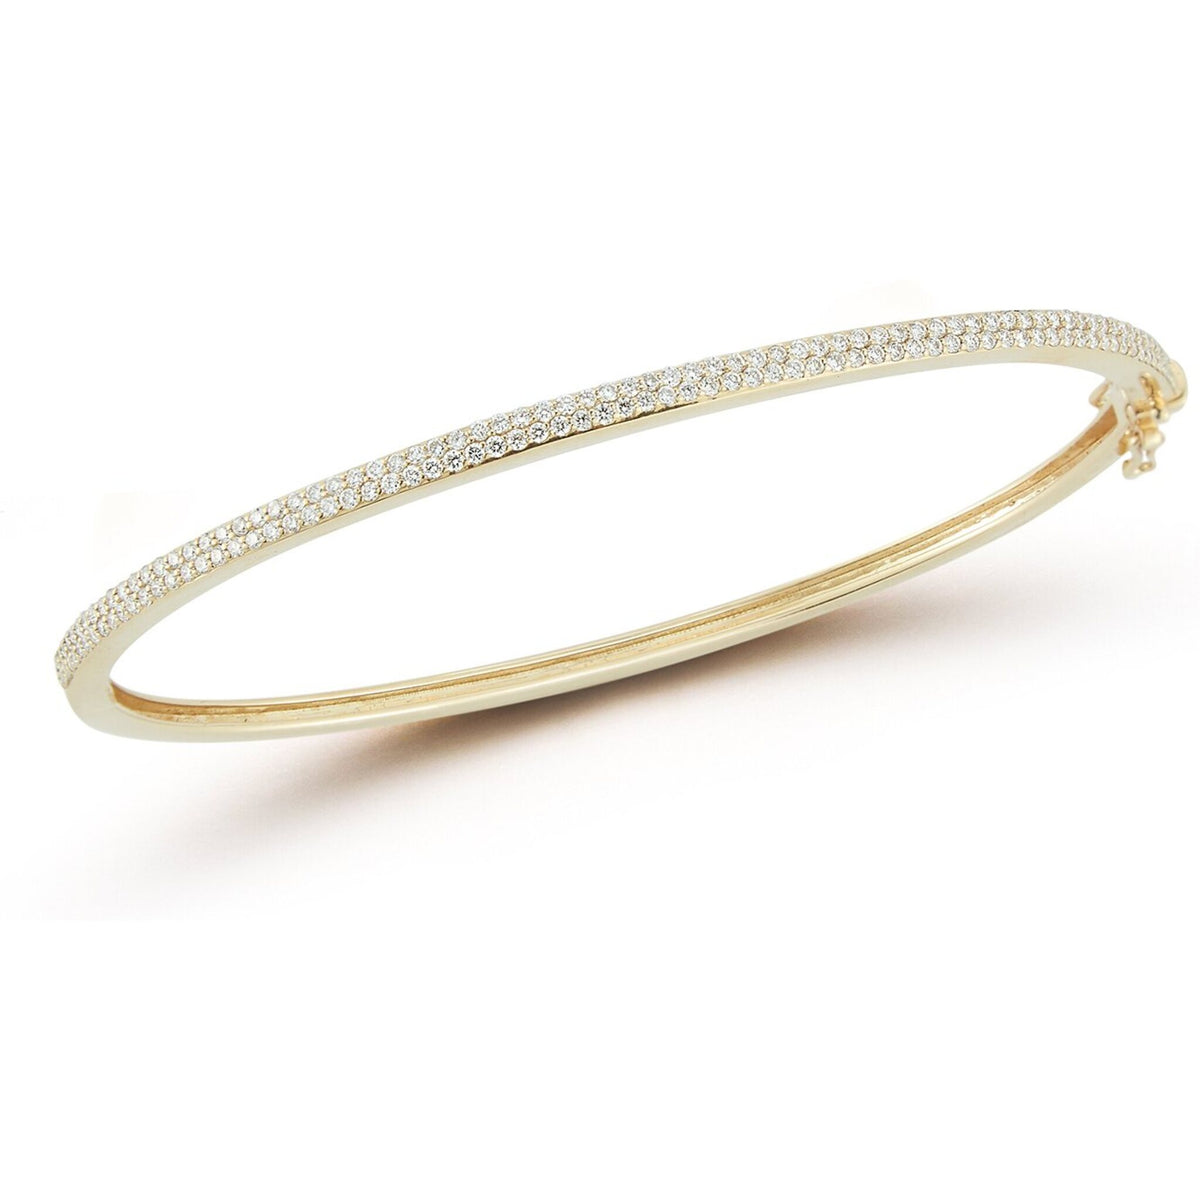 Sofer Jewelry - Two Row Thin Line Pave Diamond Bangle in 14K Yellow Gold